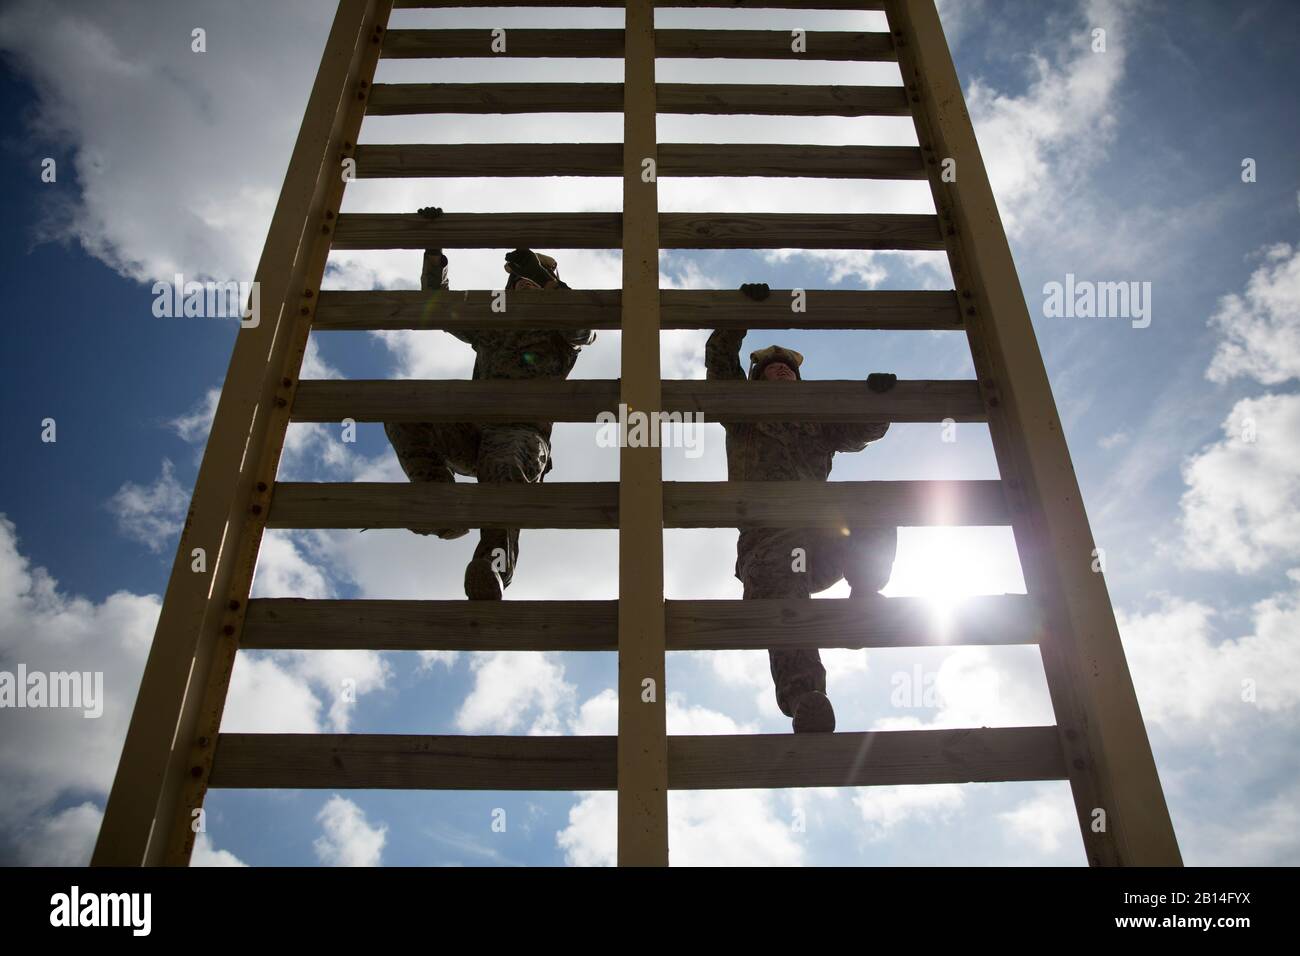 Two U.S. Marines assigned to Special Purpose Marine Air Ground Task Force-Crisis Response-Africa climb a 30-foot ladder during a fast rope exercise at Naval Station Rota, Spain, March 24, 2017. Infantry Marines maintain their fast-roping qualifications in order to remain proficient and prepare to fast rope from an aircraft as a tactical insertion method. (U.S. Marine Corps photo by Sgt. Jessika Braden) Stock Photo